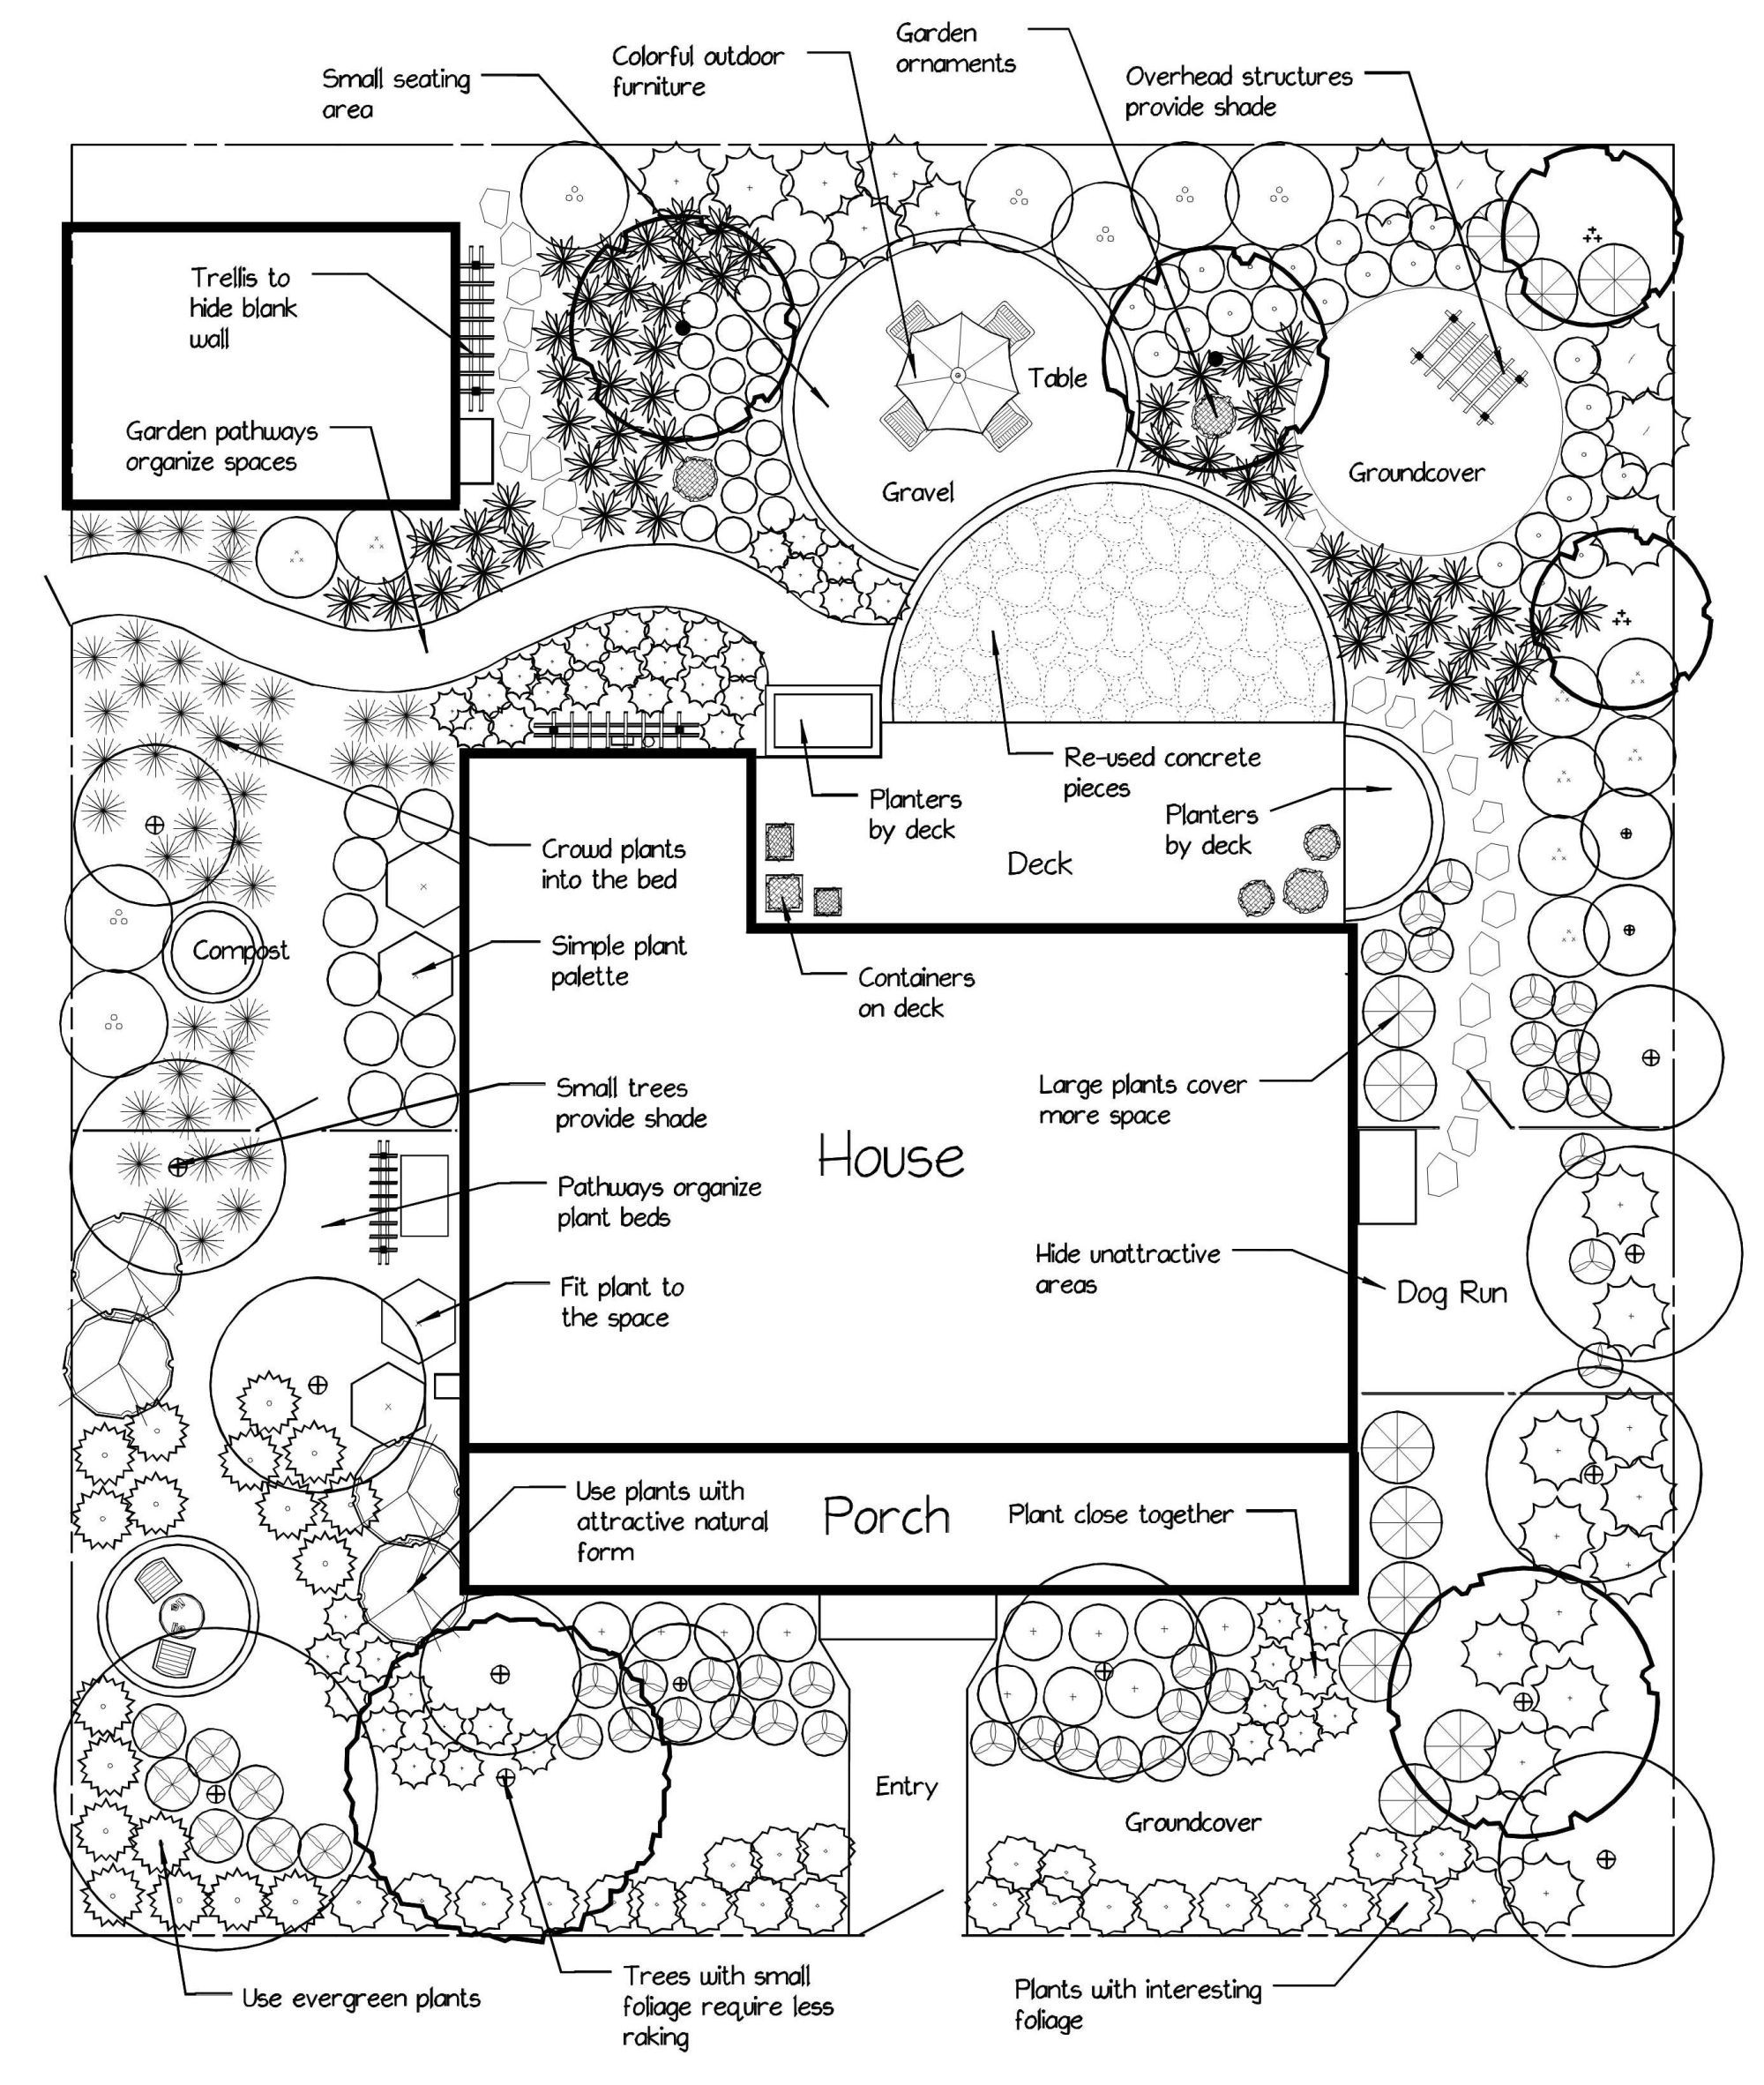 Figure 21. Use garden hardscape to create seating areas and organize plant beds.